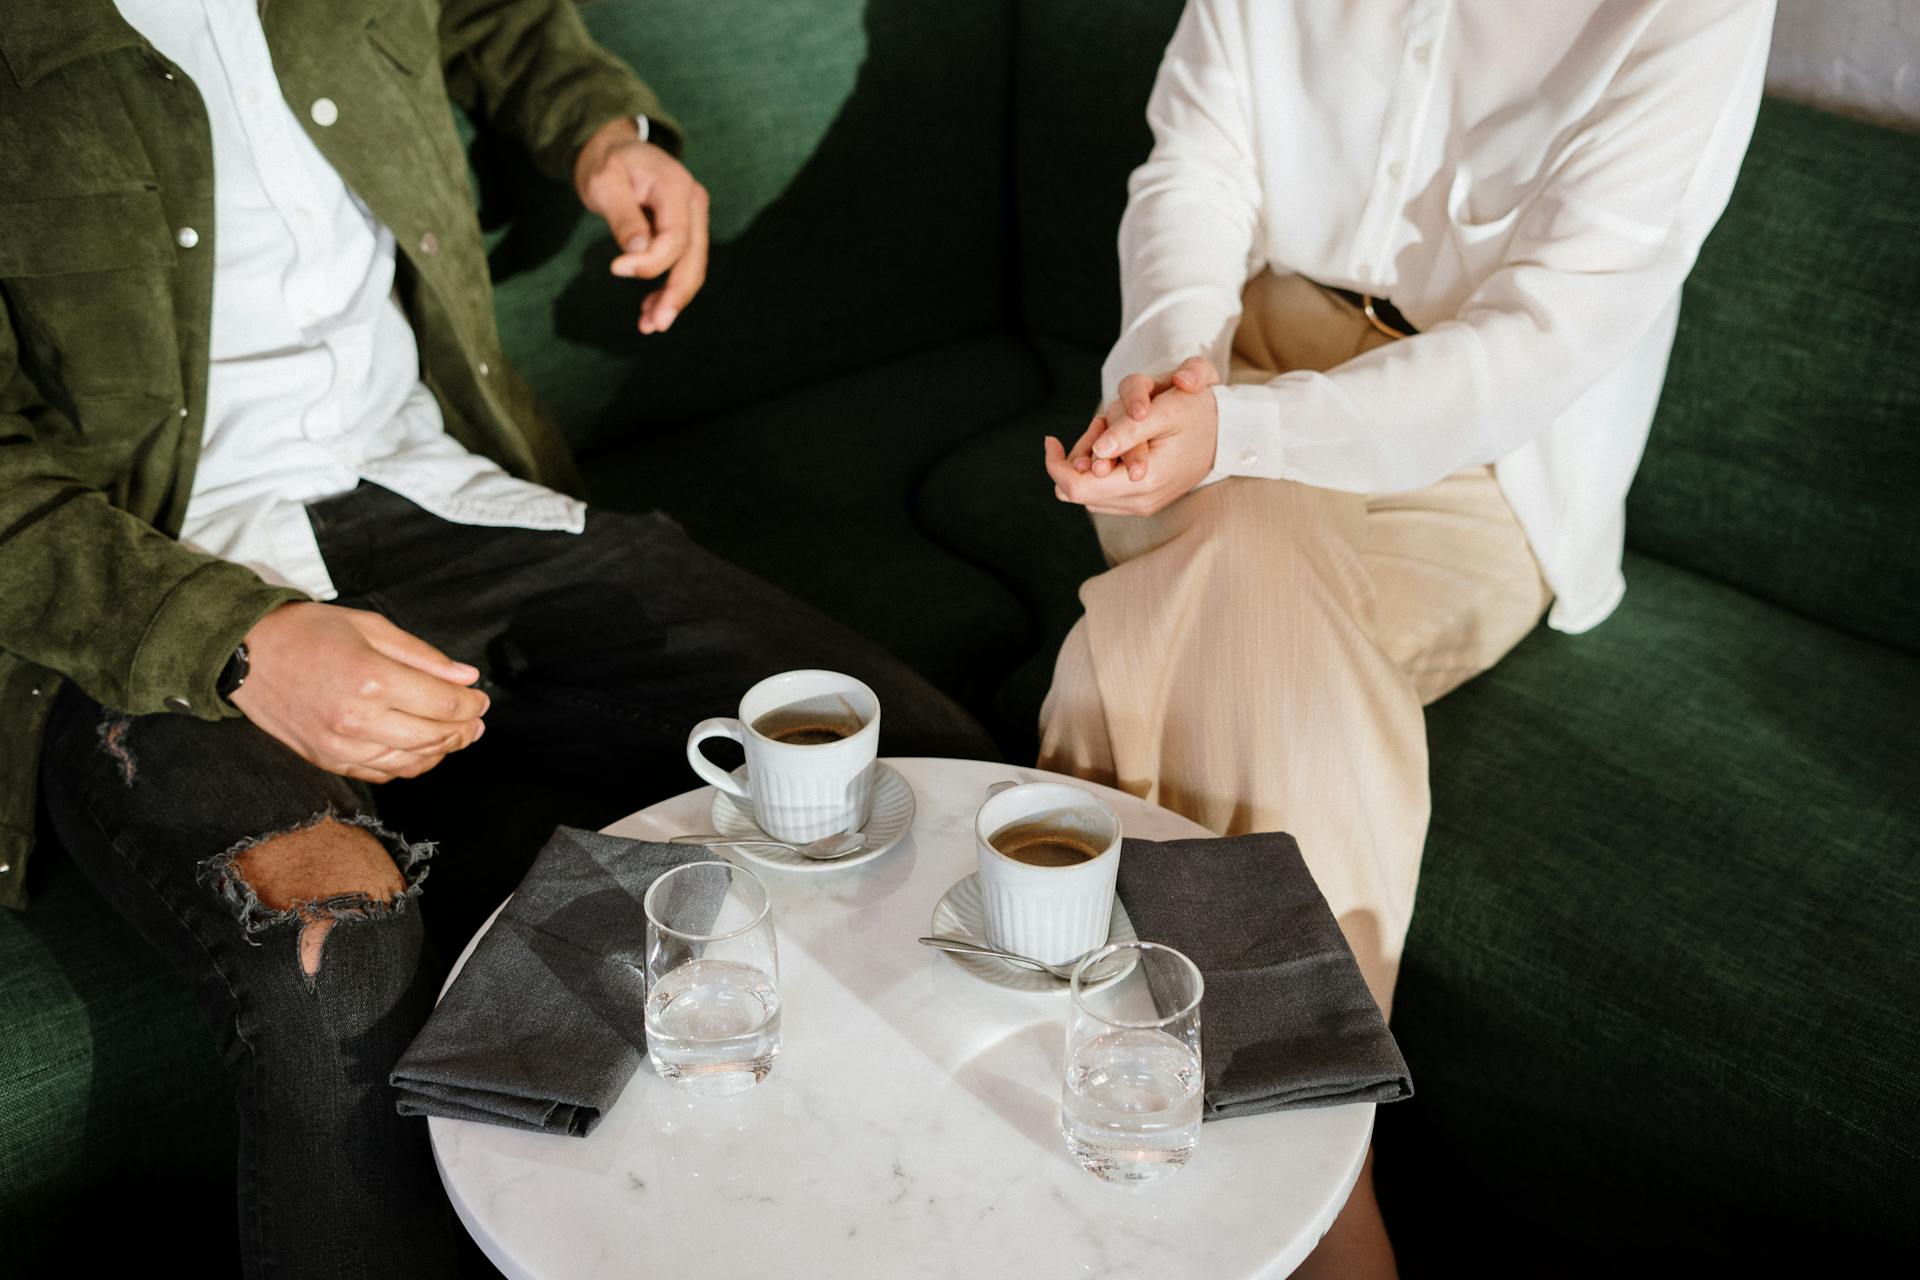 A couple sitting together and drinking coffee | Source: Pexels